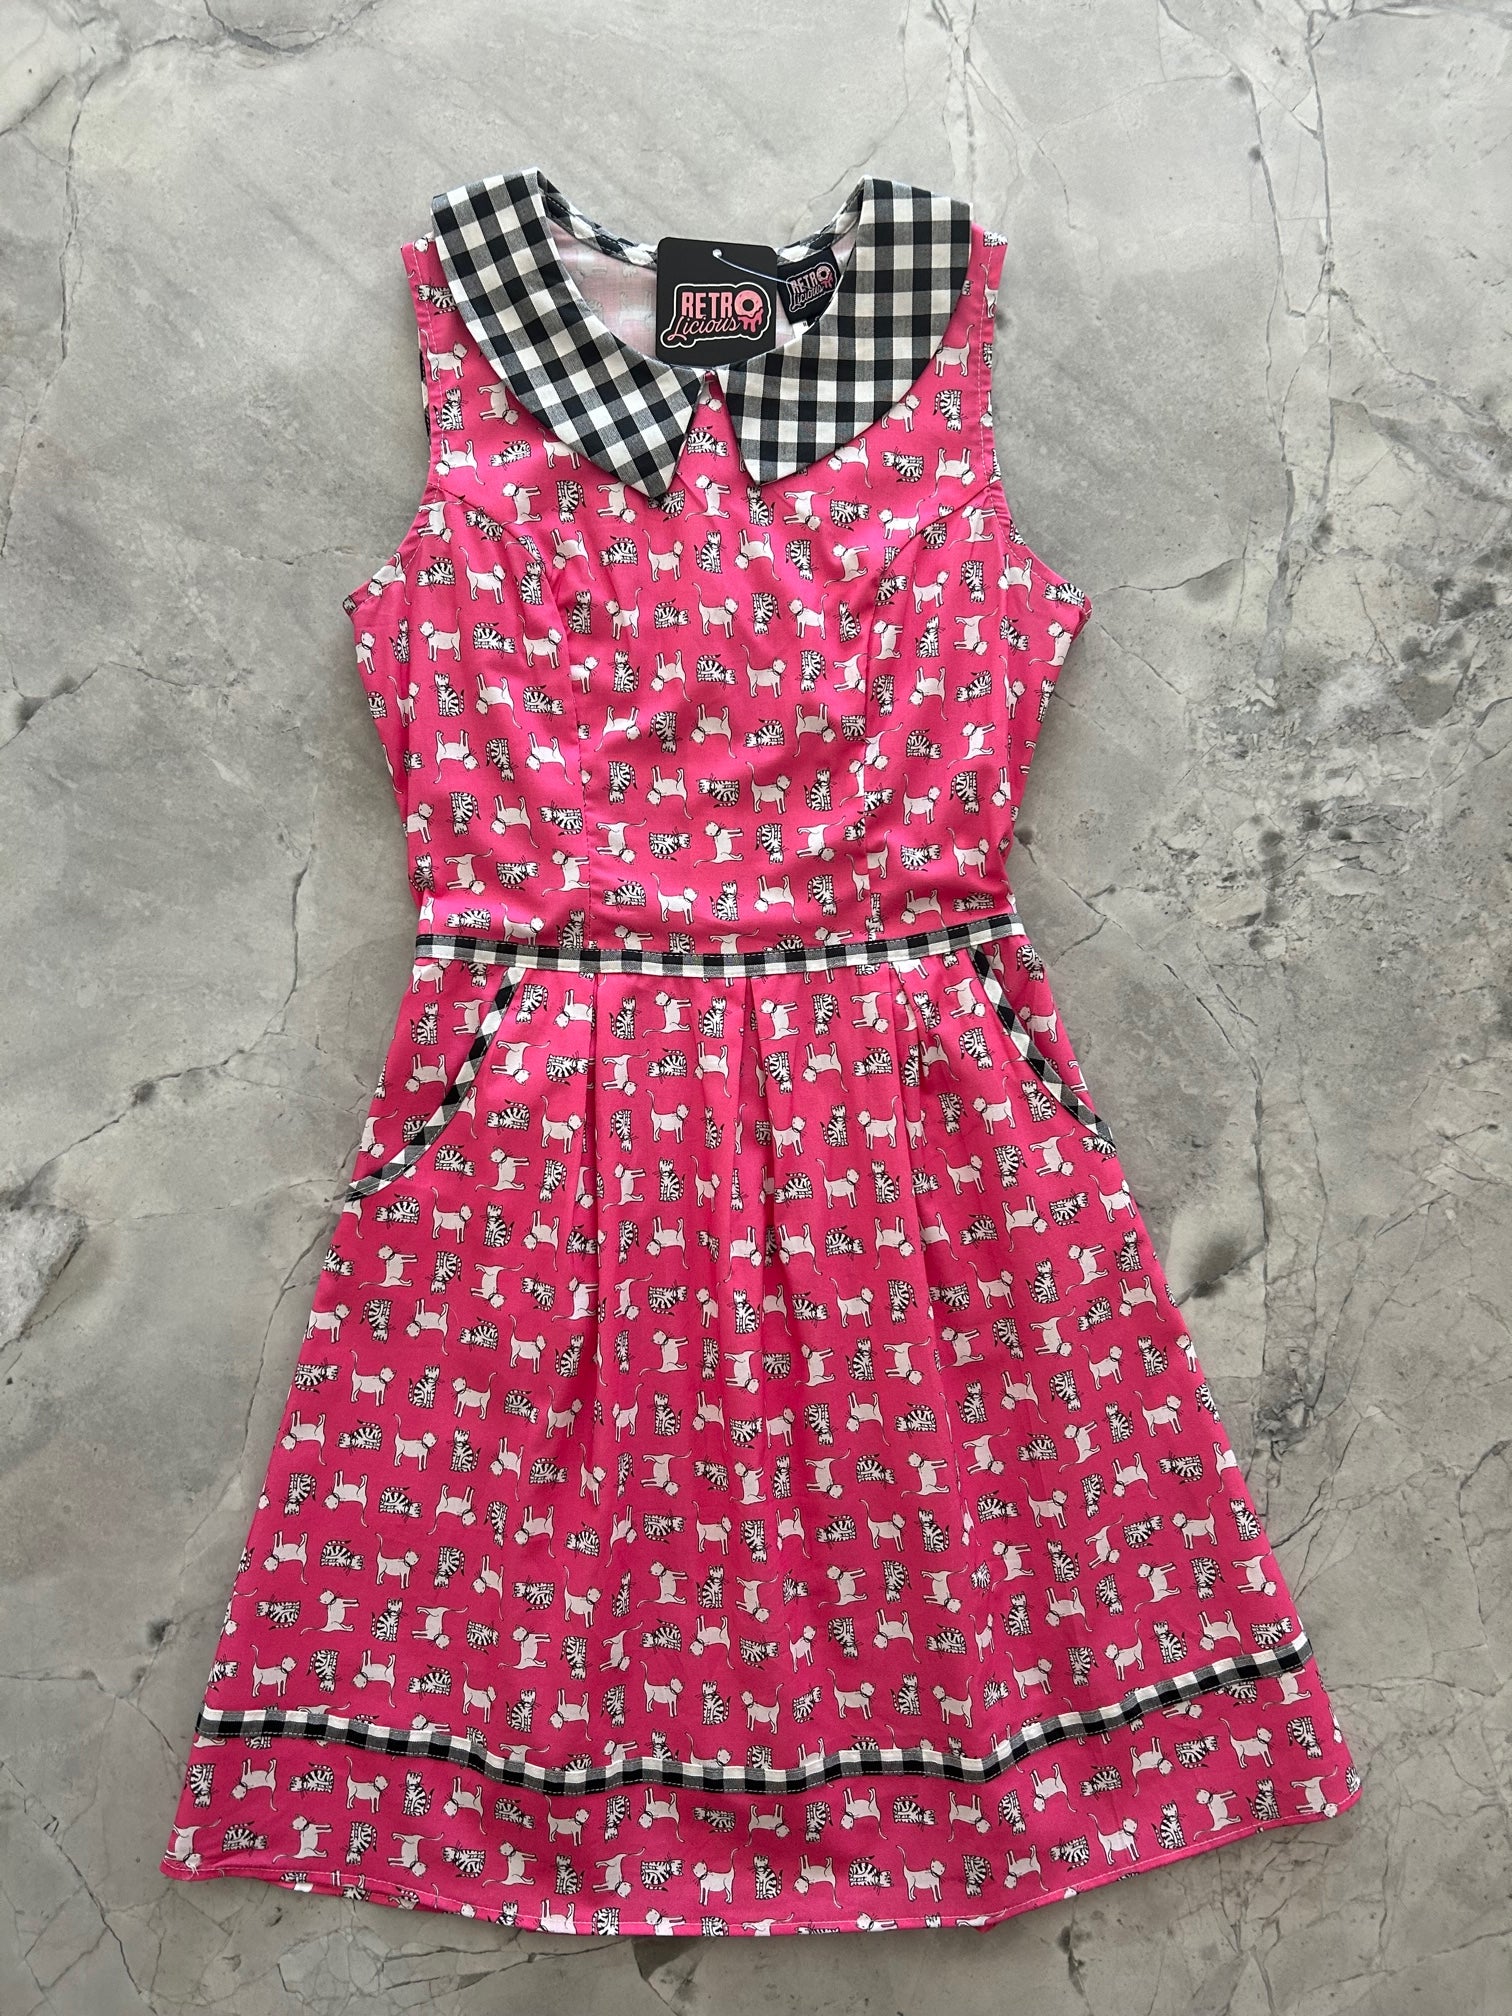 flat lay image of the cat's meow collared dress